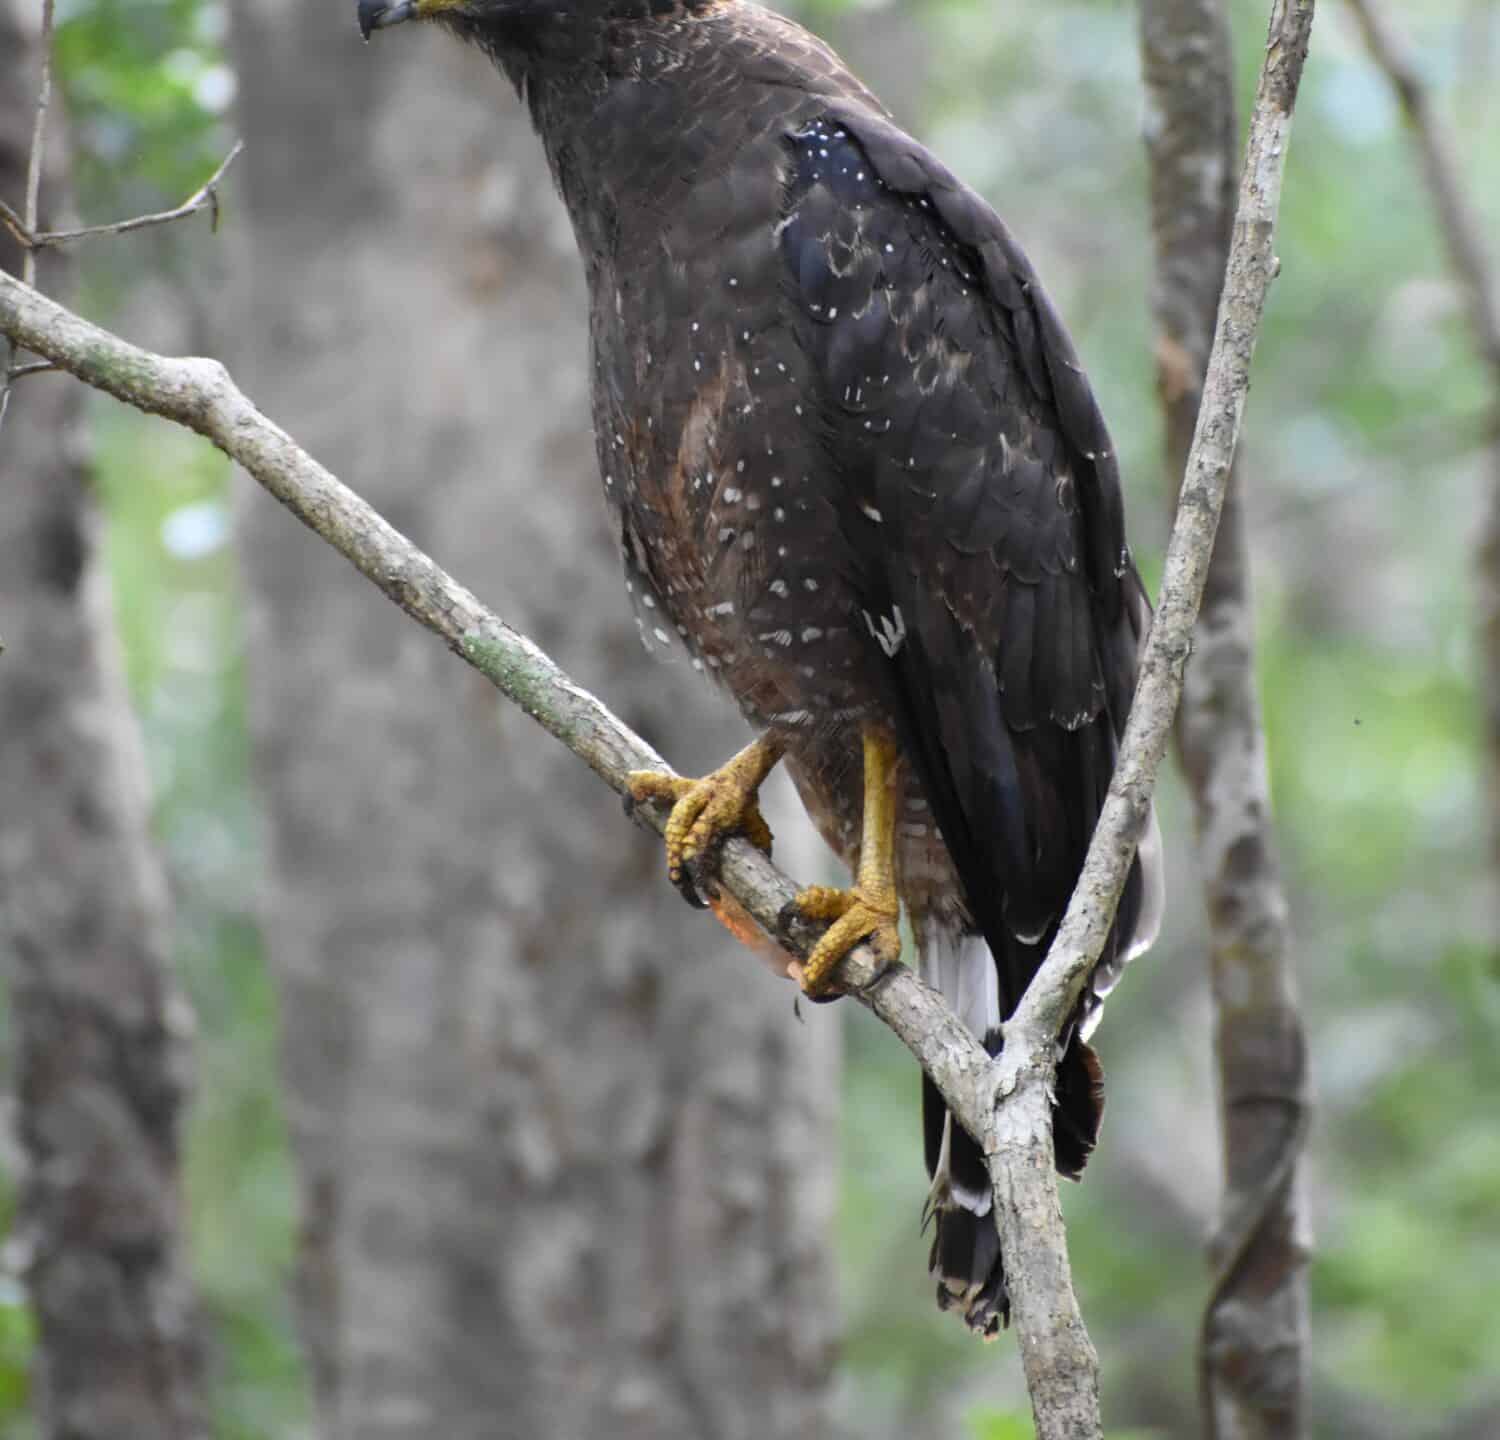 serpent eagle or Spilornis kinabaluensis or Kinabalu serpent eagle perched on a tree branch and searchig for a prey"